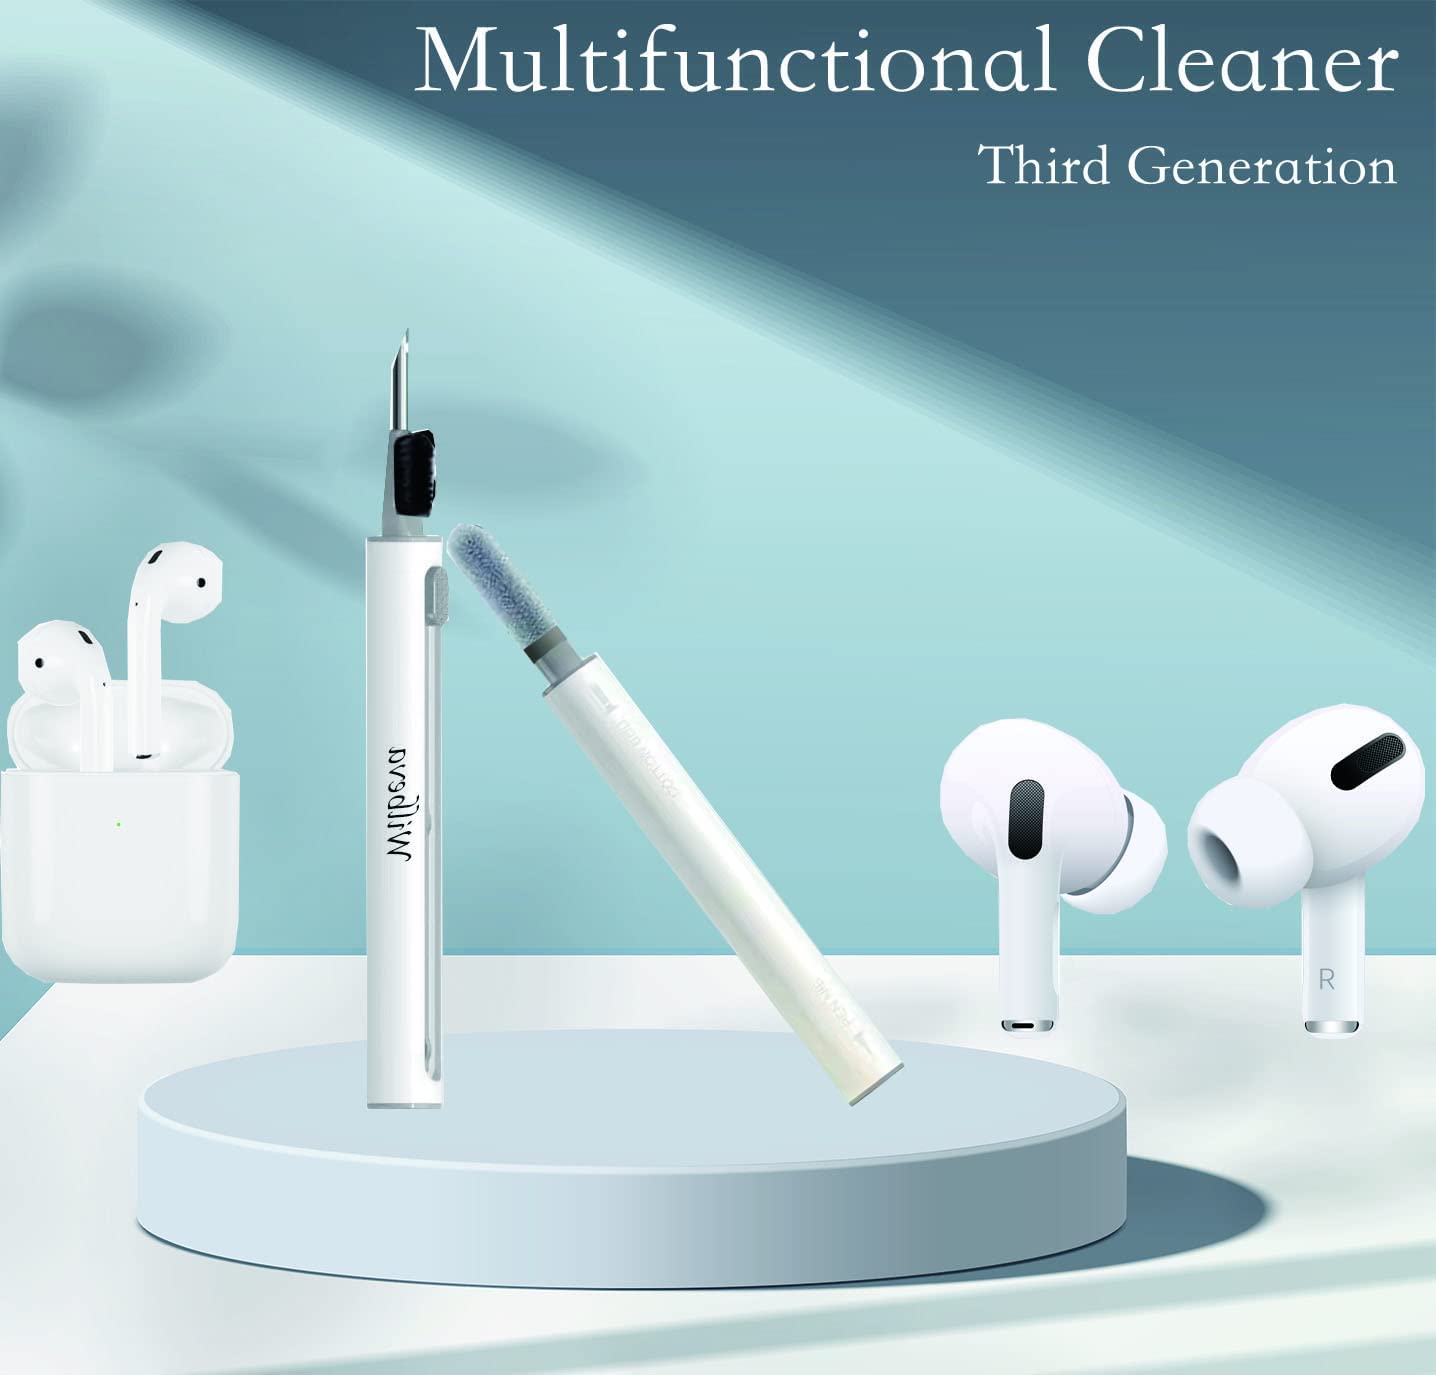 An AirPod cleaning pen along with two pairs of clean AirPods. There is text which says, 'Multifunctional cleaner third generation.'